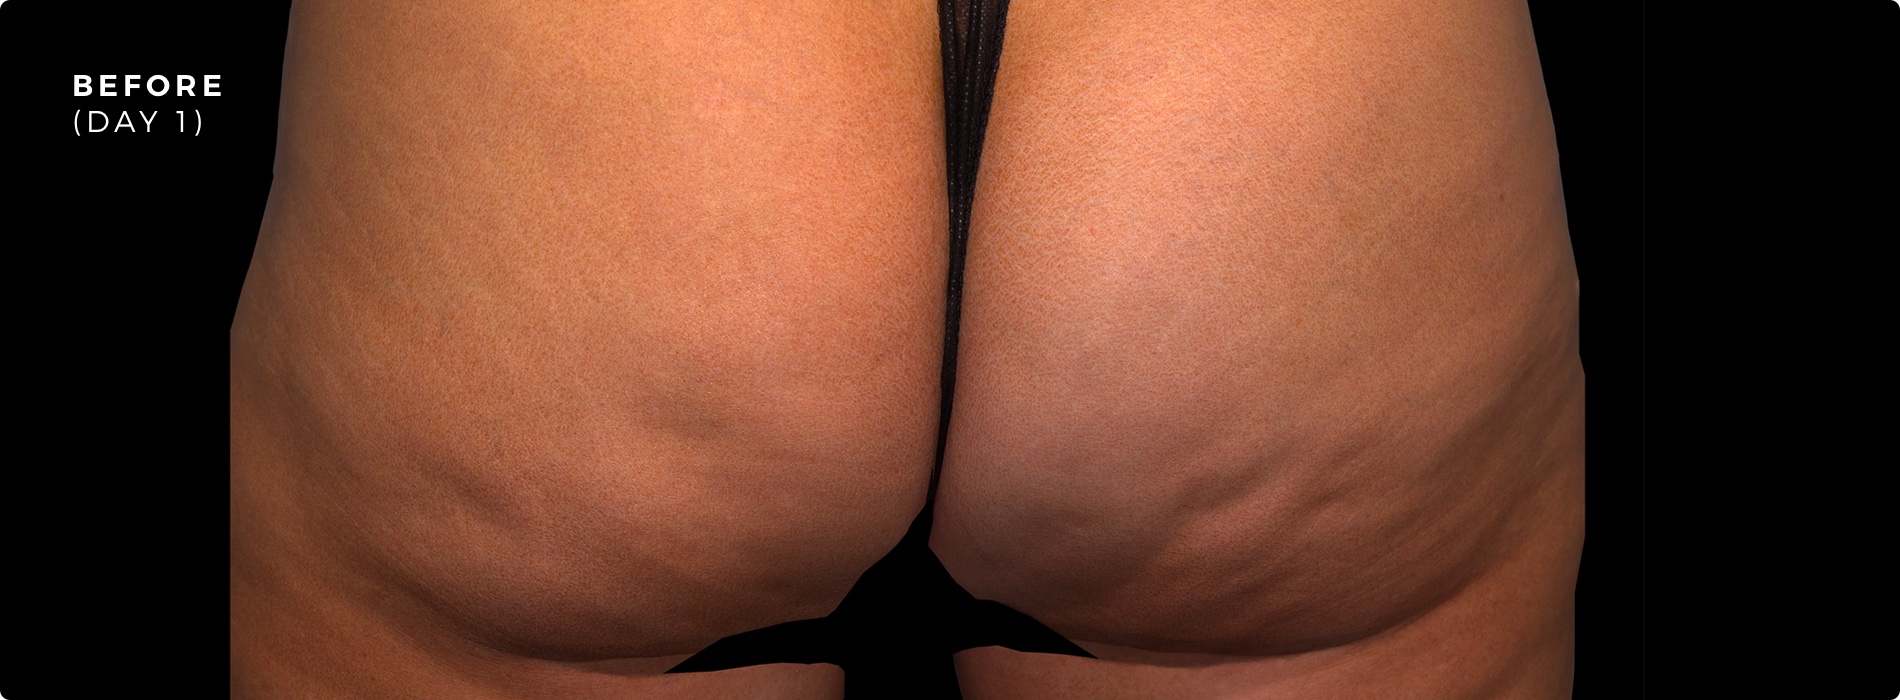 Prior to Maryland Cellulite Treatment